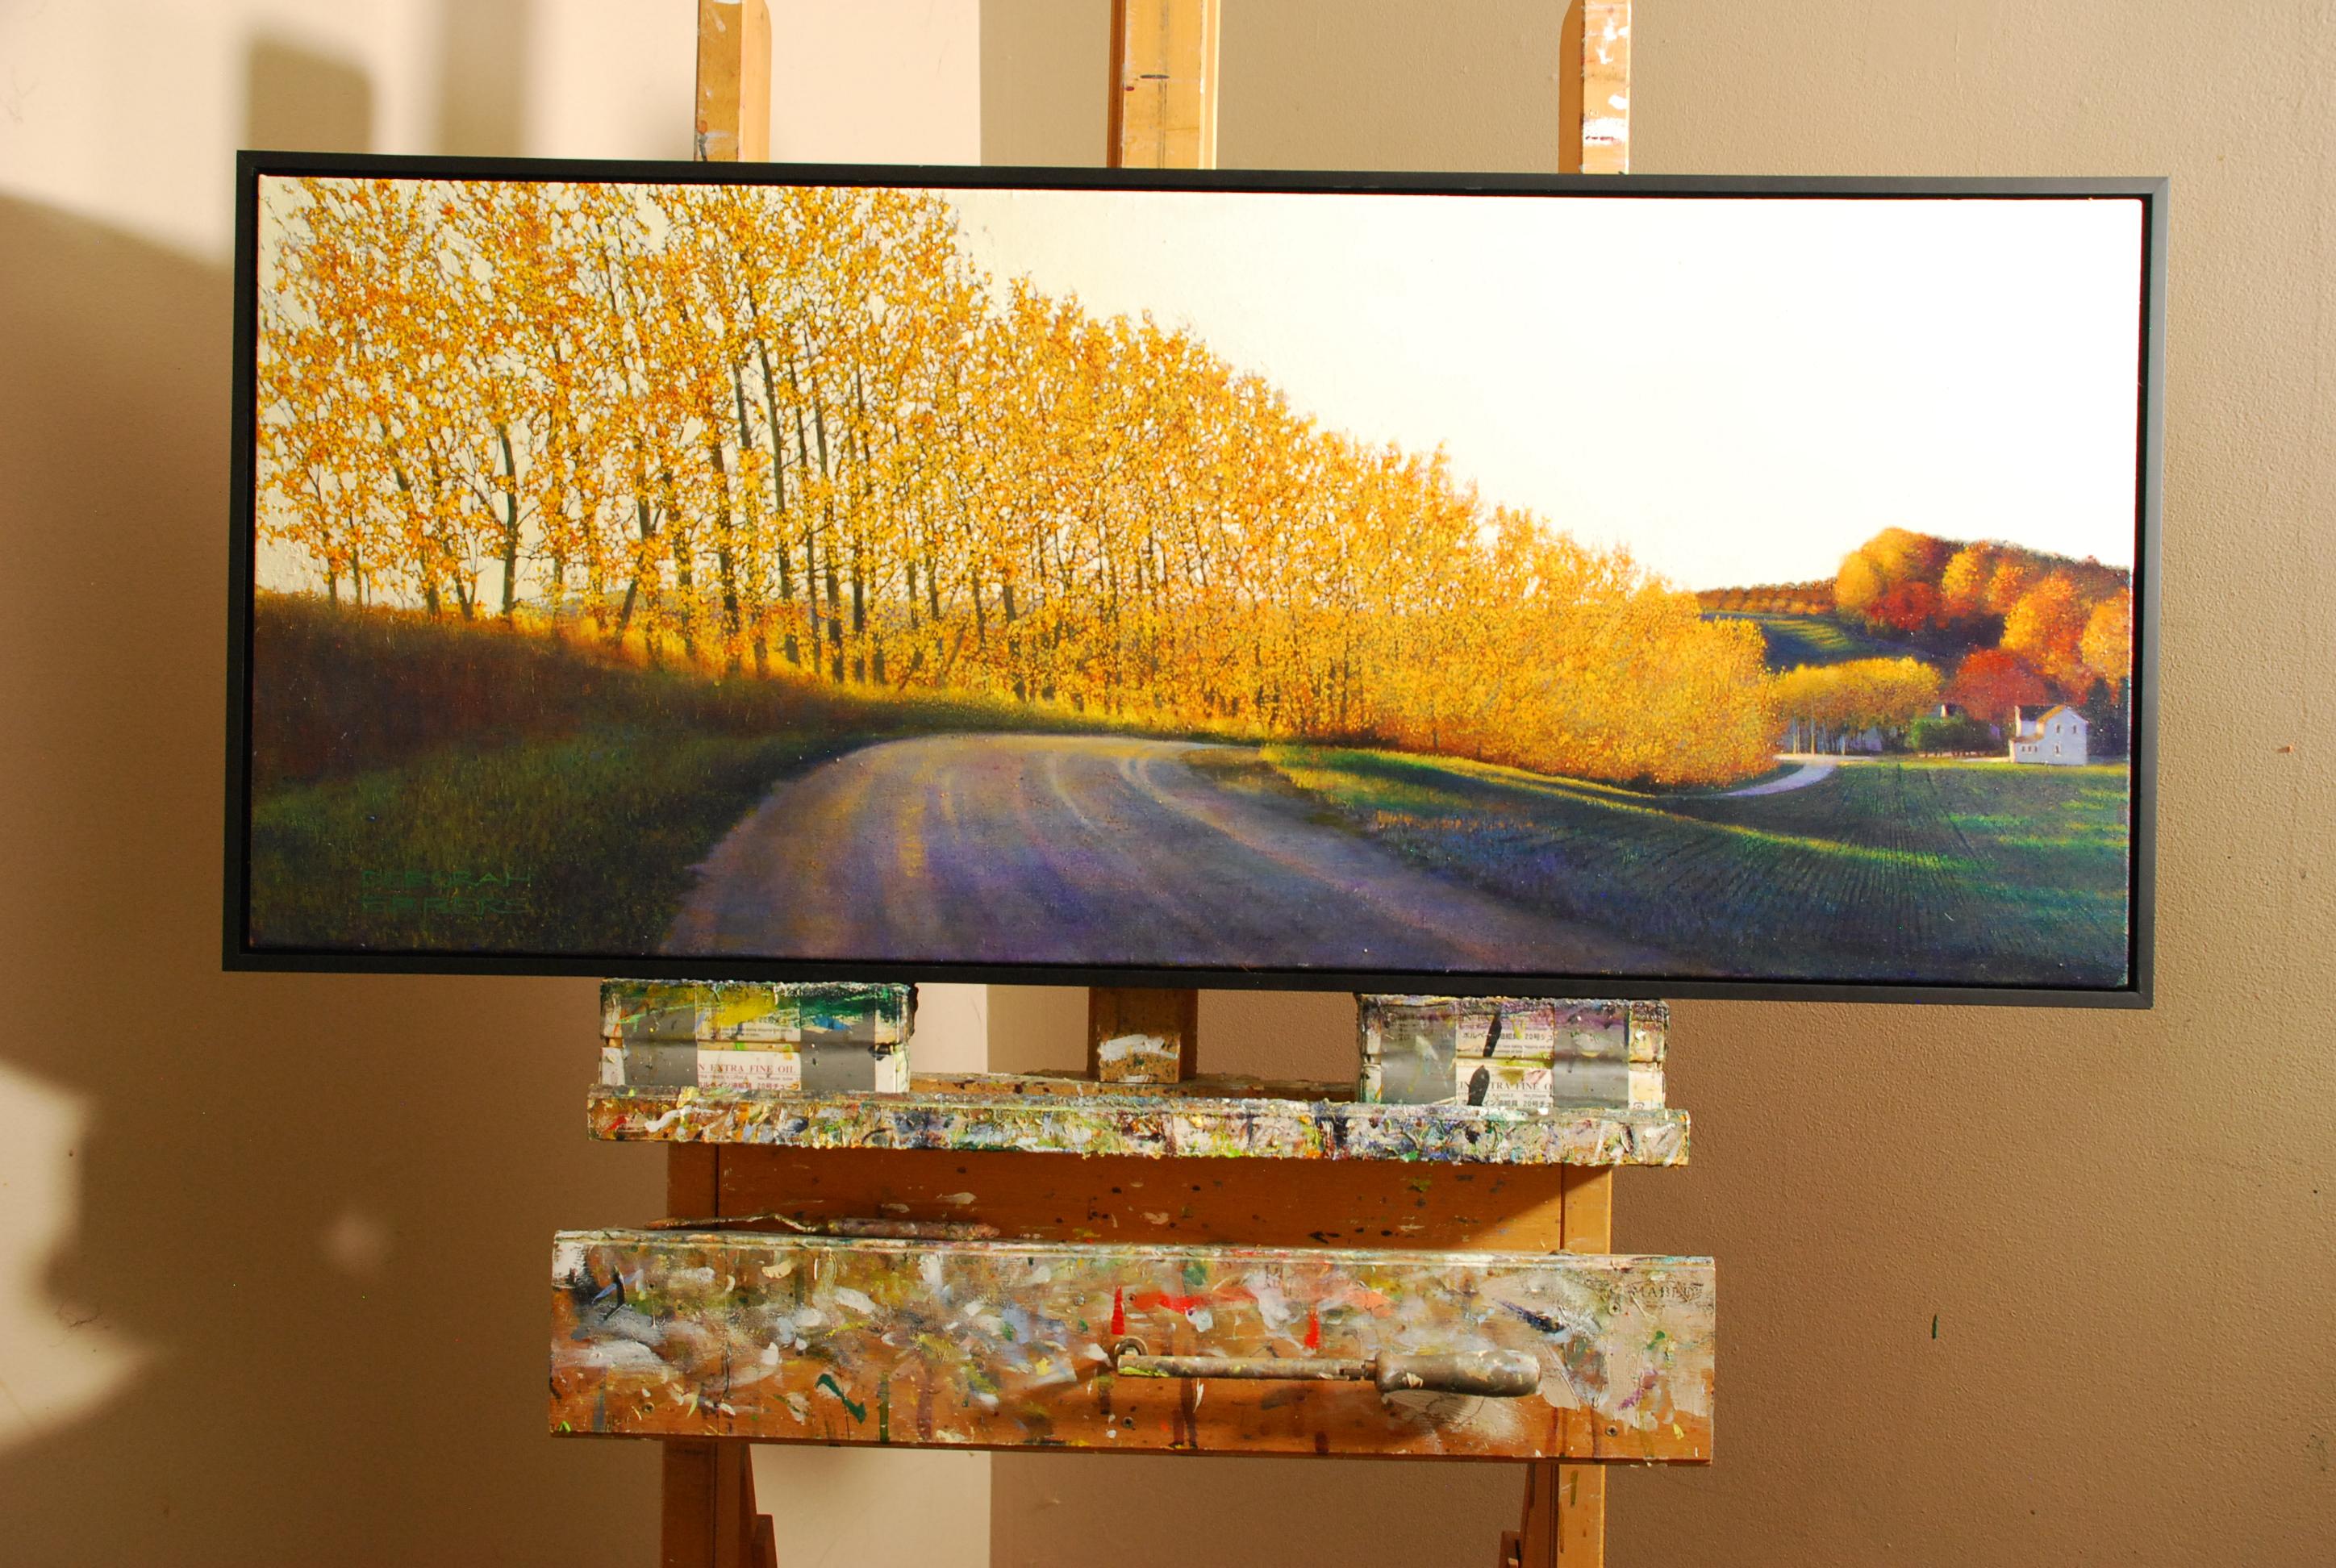 The Color of Home, Original Oil Painting, Glowing Autumn Foliage on Country Road 2